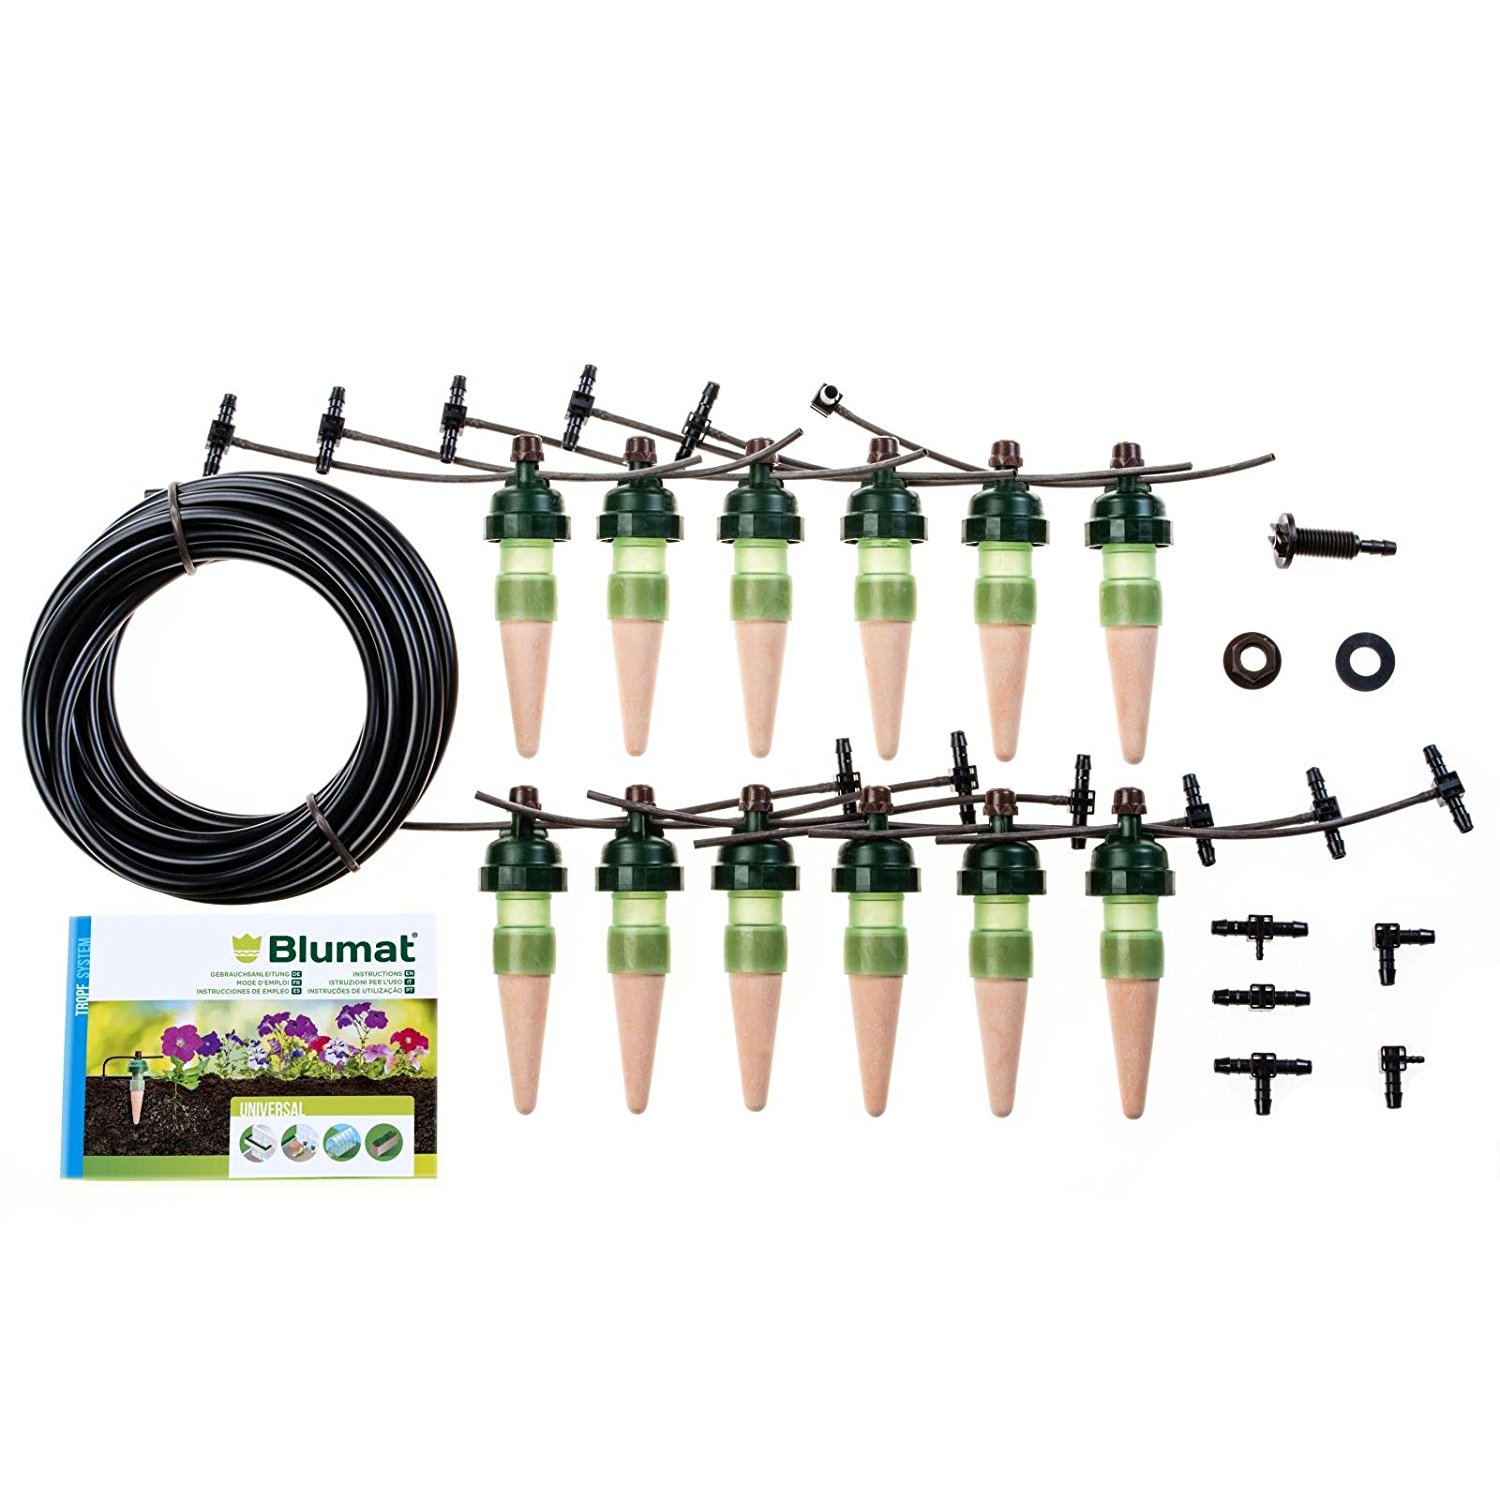 Details about   5 Blumat Starter Watering Kit Automatic Drip Irrigation System for Garden 